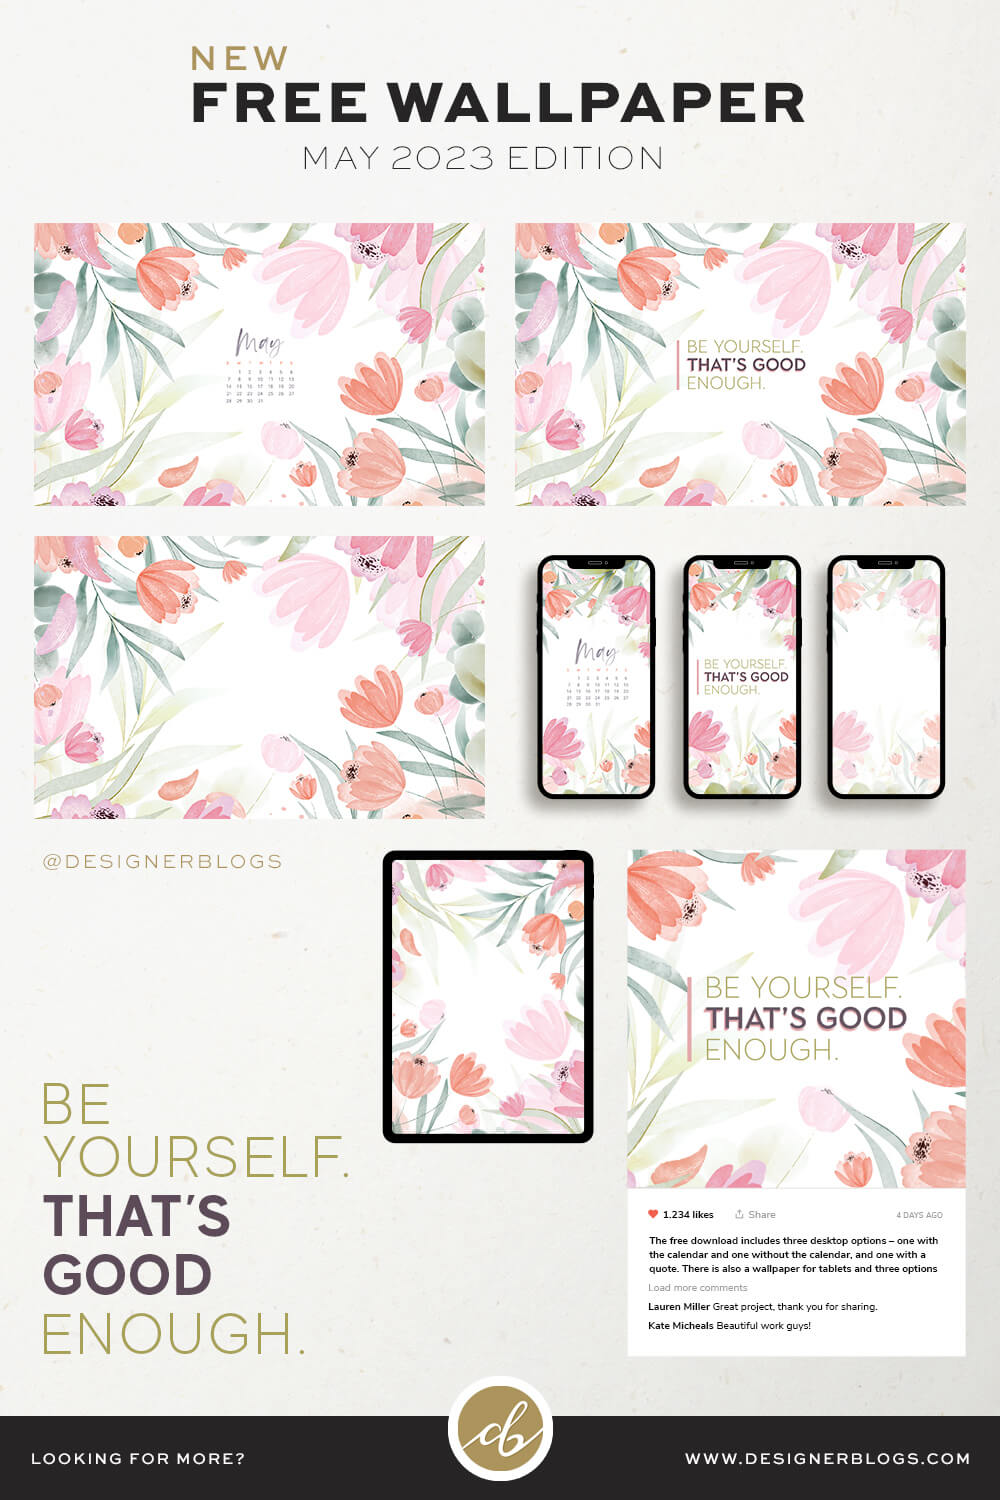 Free Monthly Wallpaper Package for May 2023 including a matching social media image with a quote